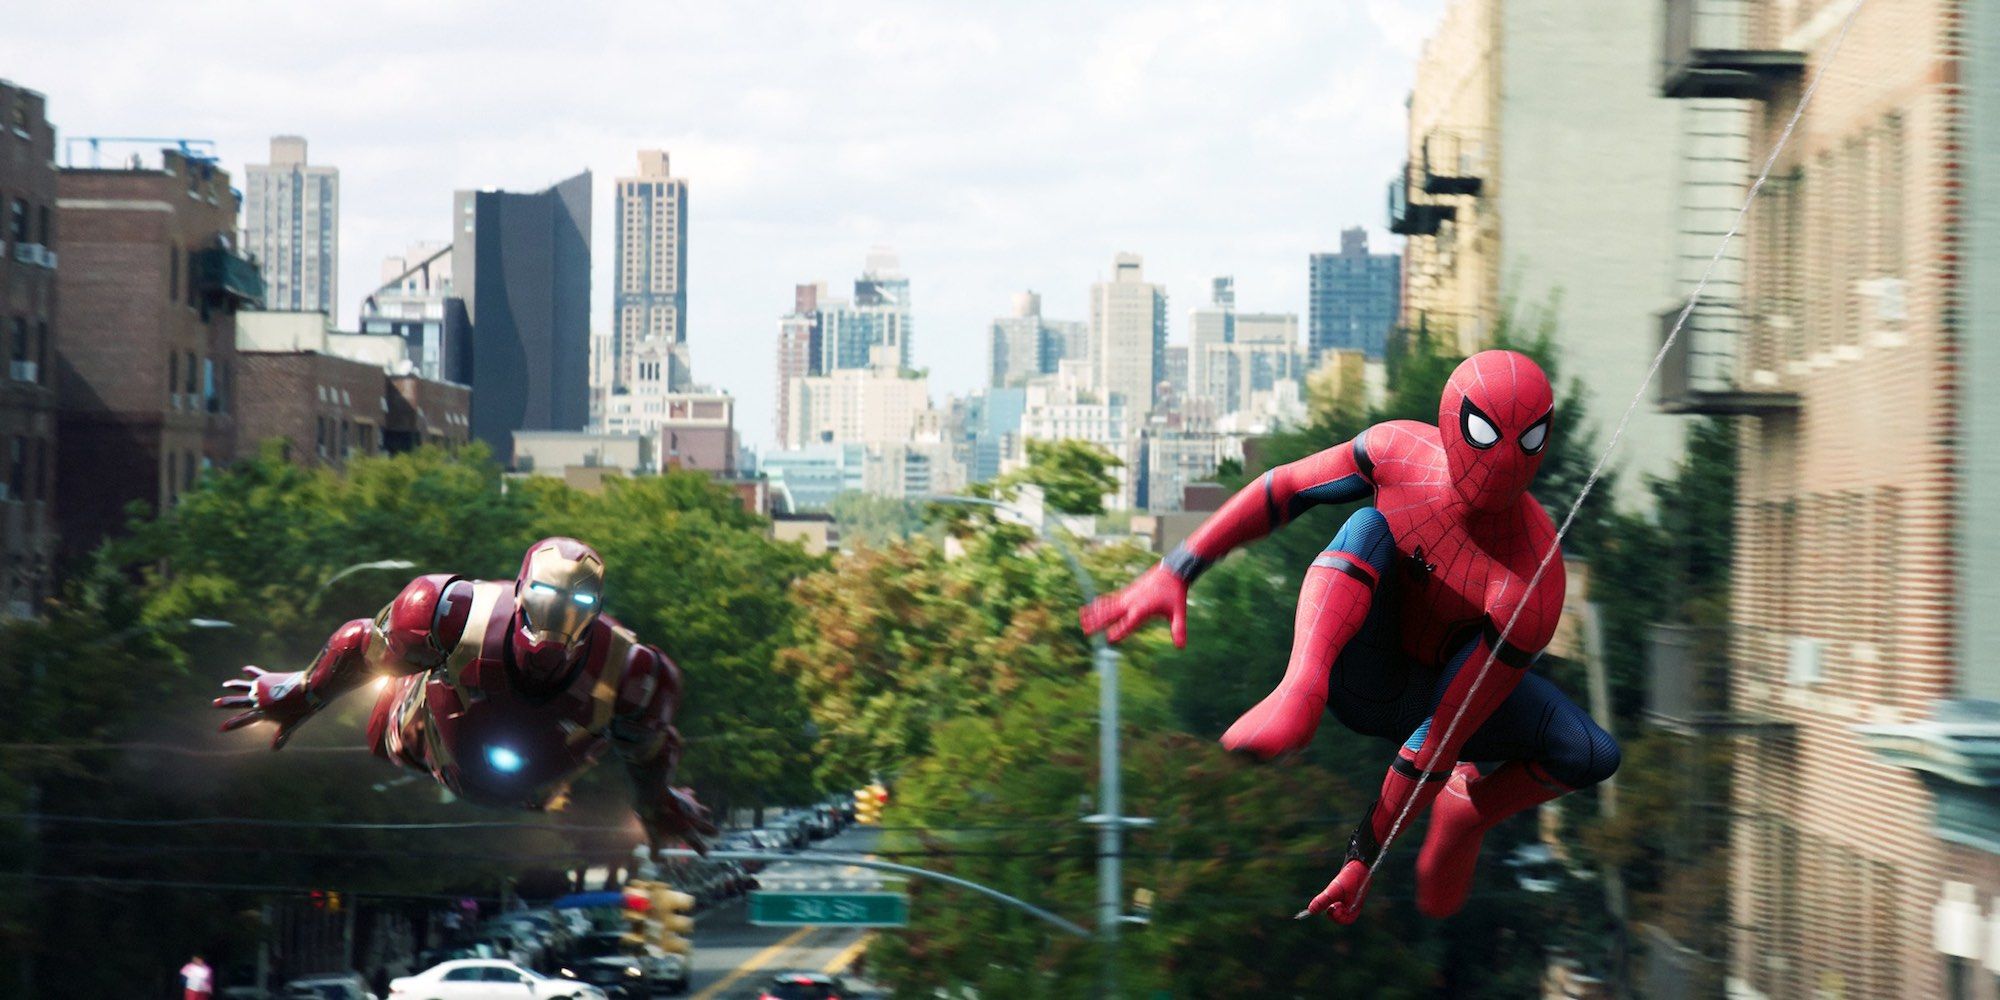 Spider-Man and Iron Man fly together in a cut scene from Spider-Man: Homecoming